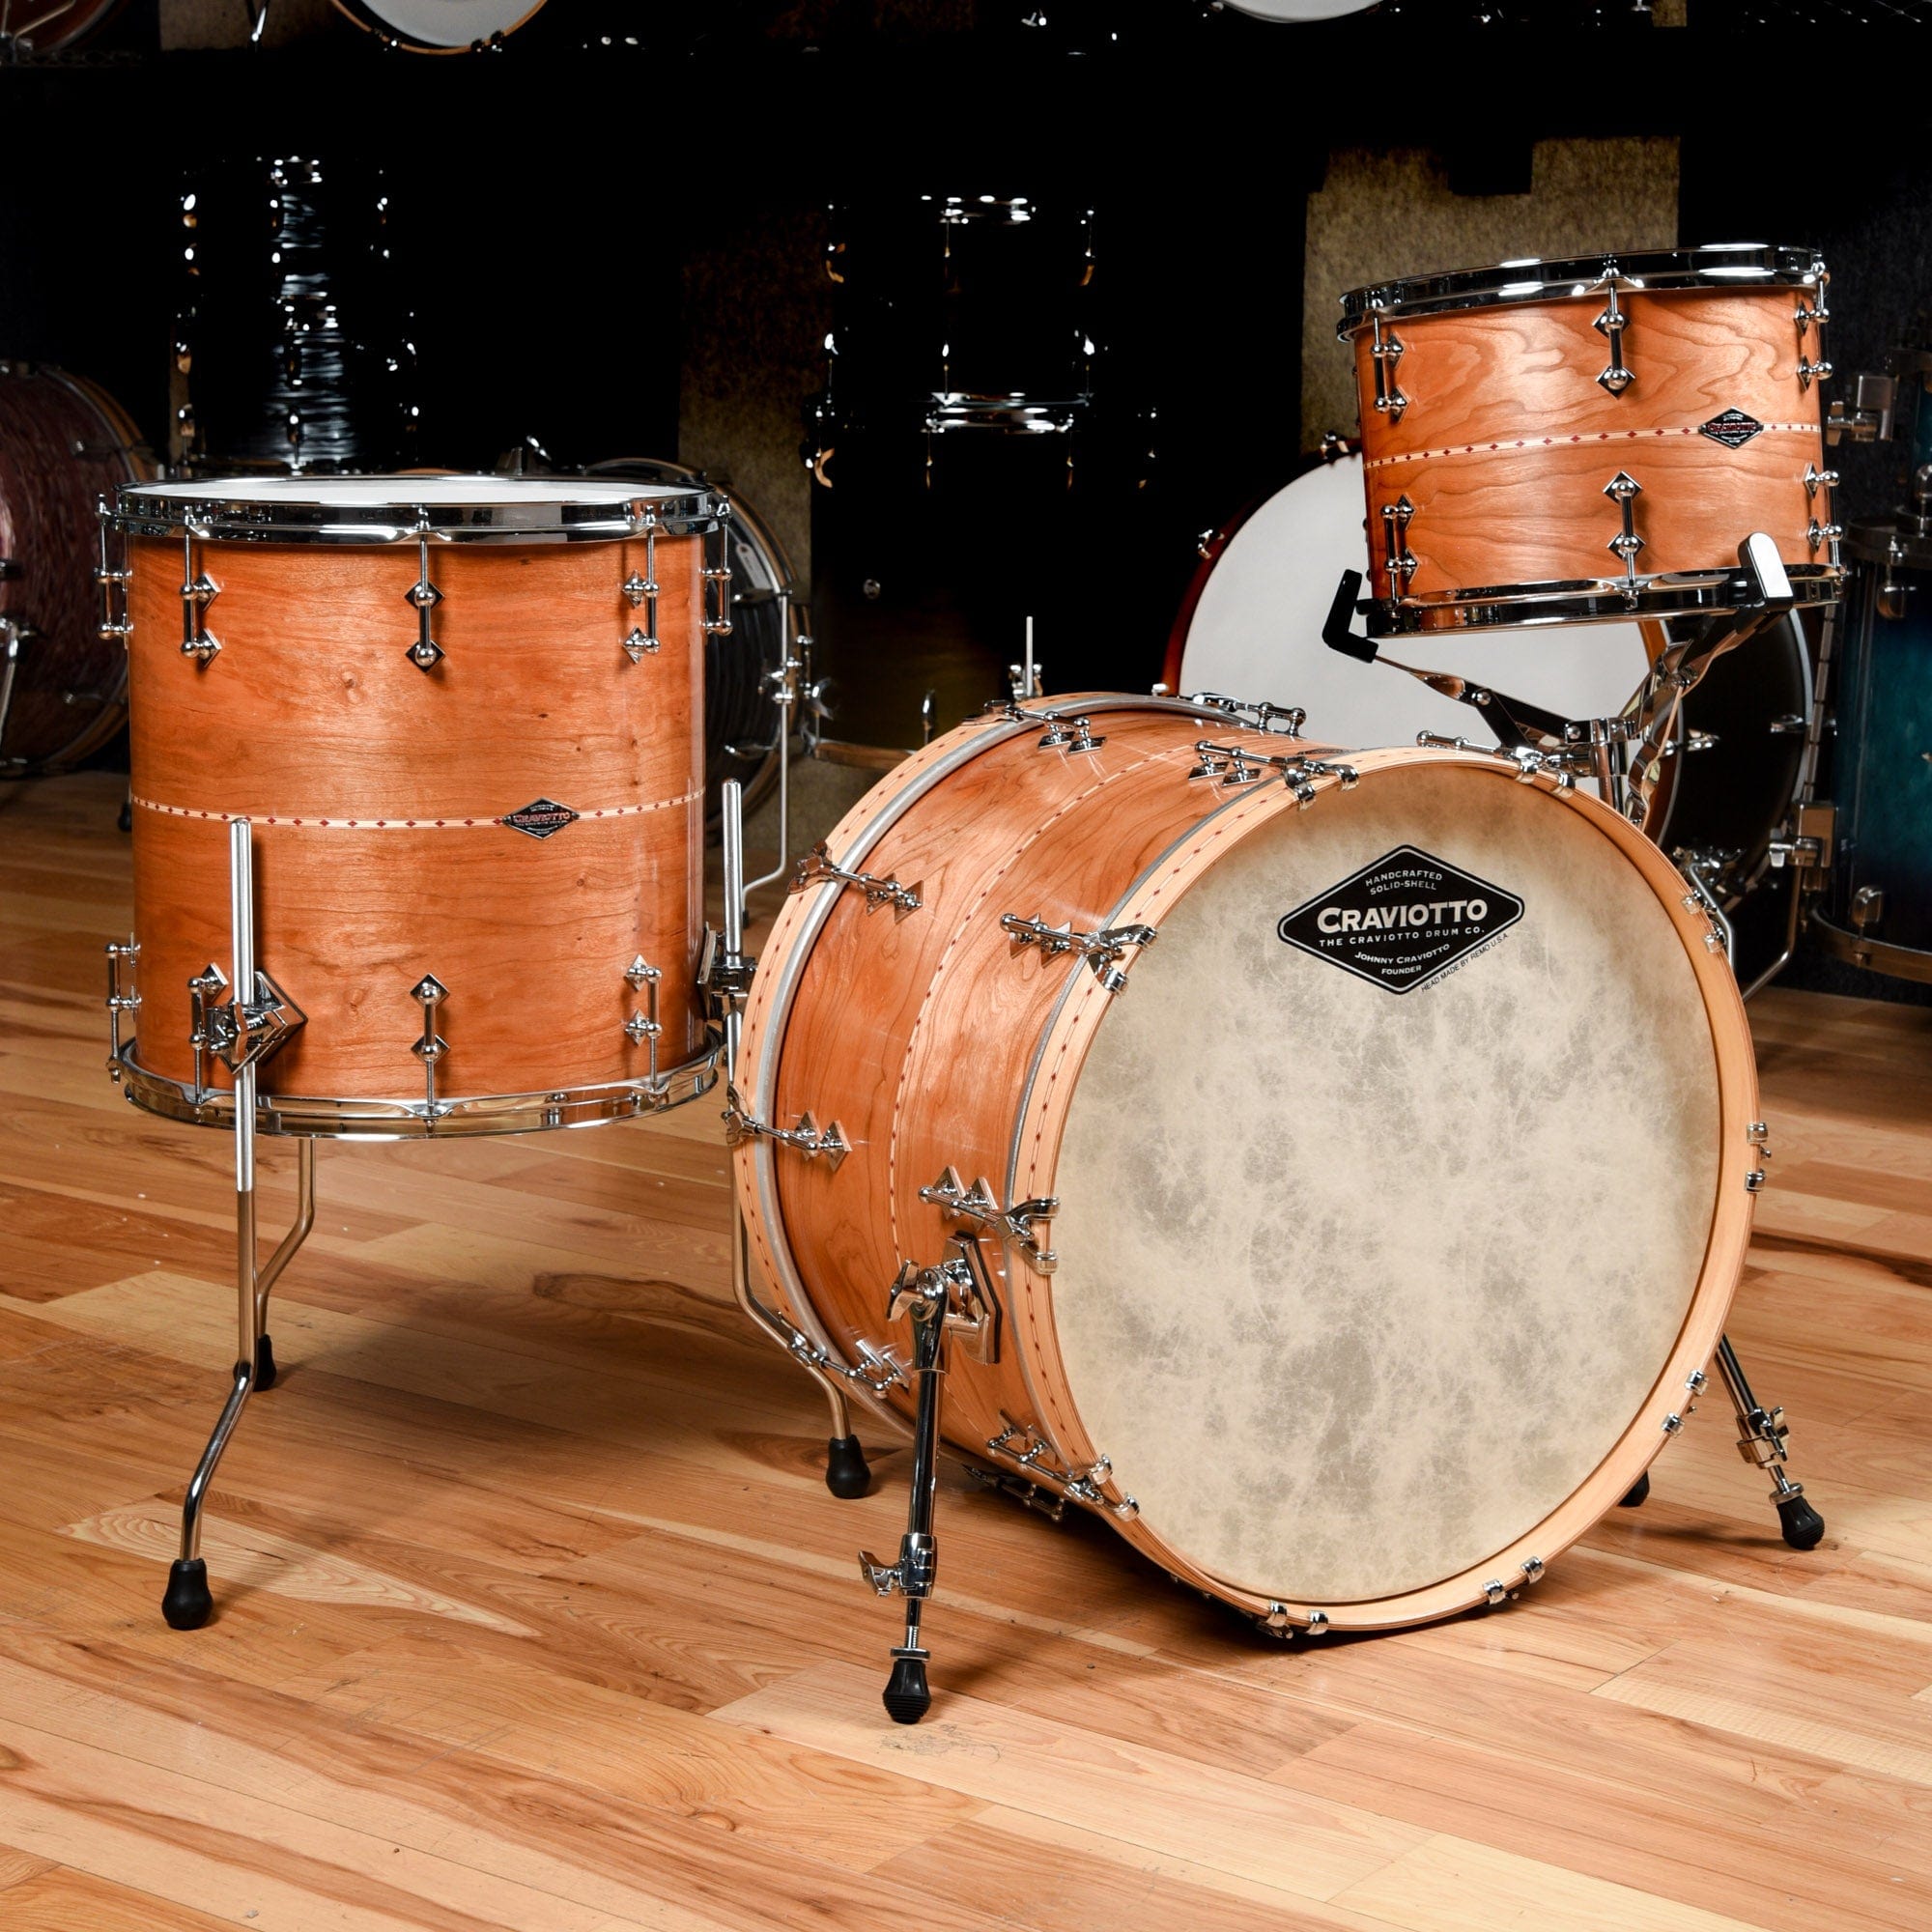 Craviotto 13/16/22 3pc. Solid Cherry Drum Kit w/Red Inlay Natural Satin Drums and Percussion / Acoustic Drums / Full Acoustic Kits